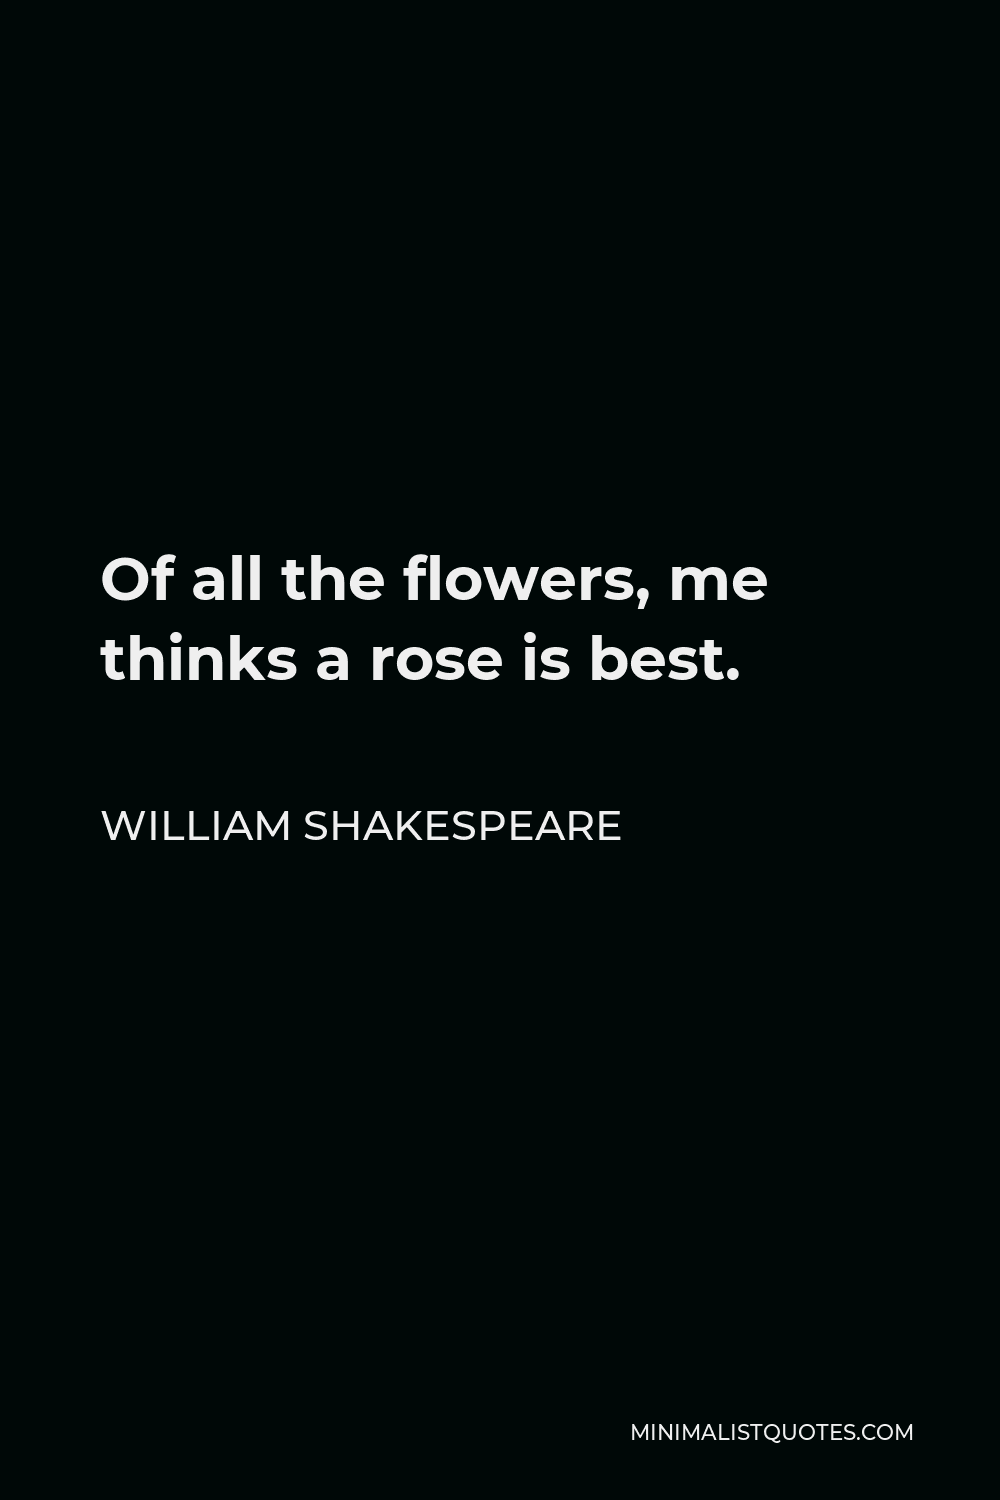 William Shakespeare Quote: Of All The Flowers, Me Thinks A Rose Is Best.